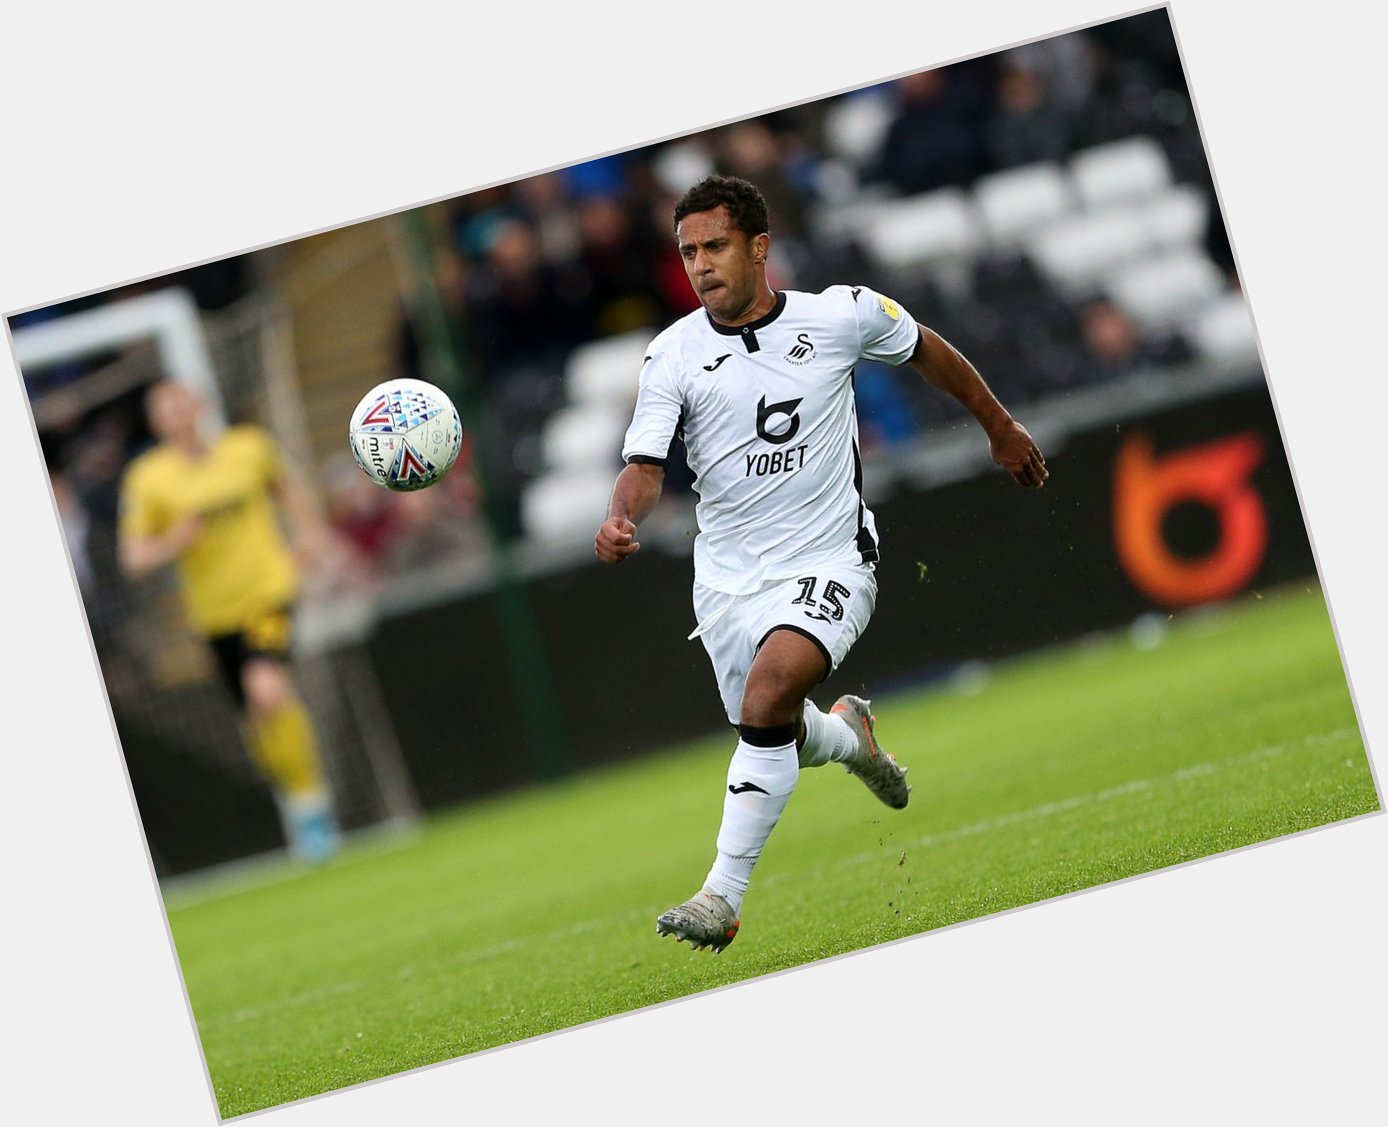 Happy birthday to Wayne Routledge who is 35 today!  